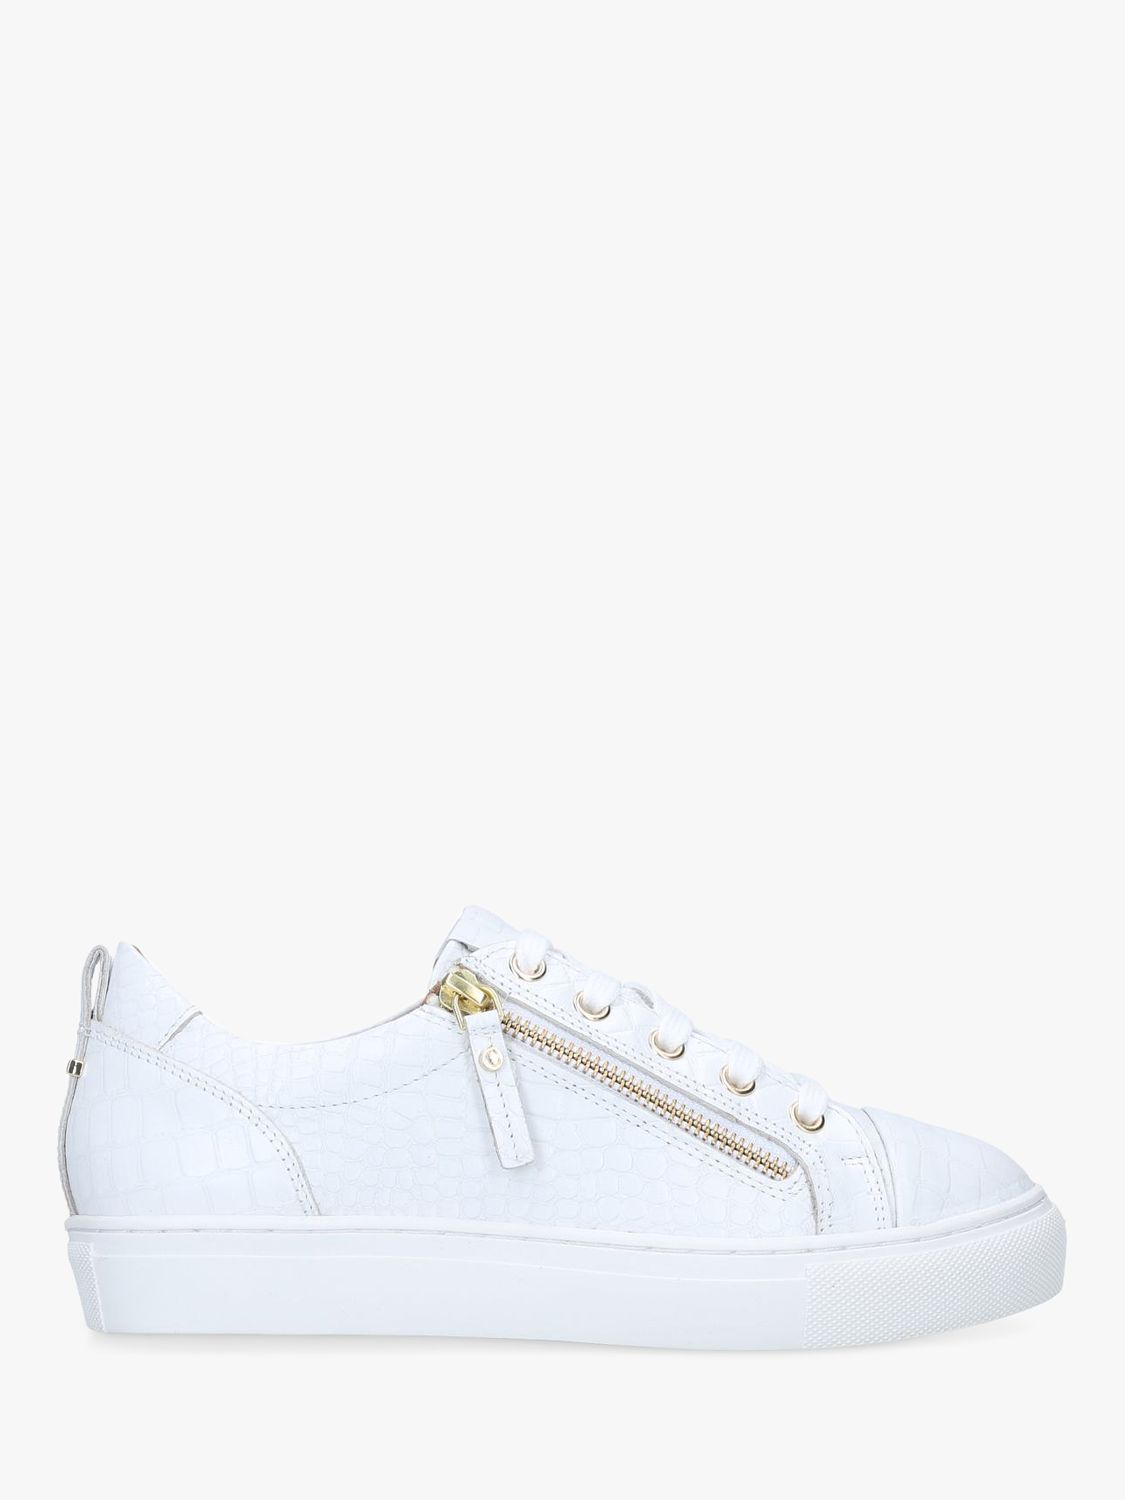 Carvela Logan Leather Lace Up Trainers, White at John Lewis & Partners